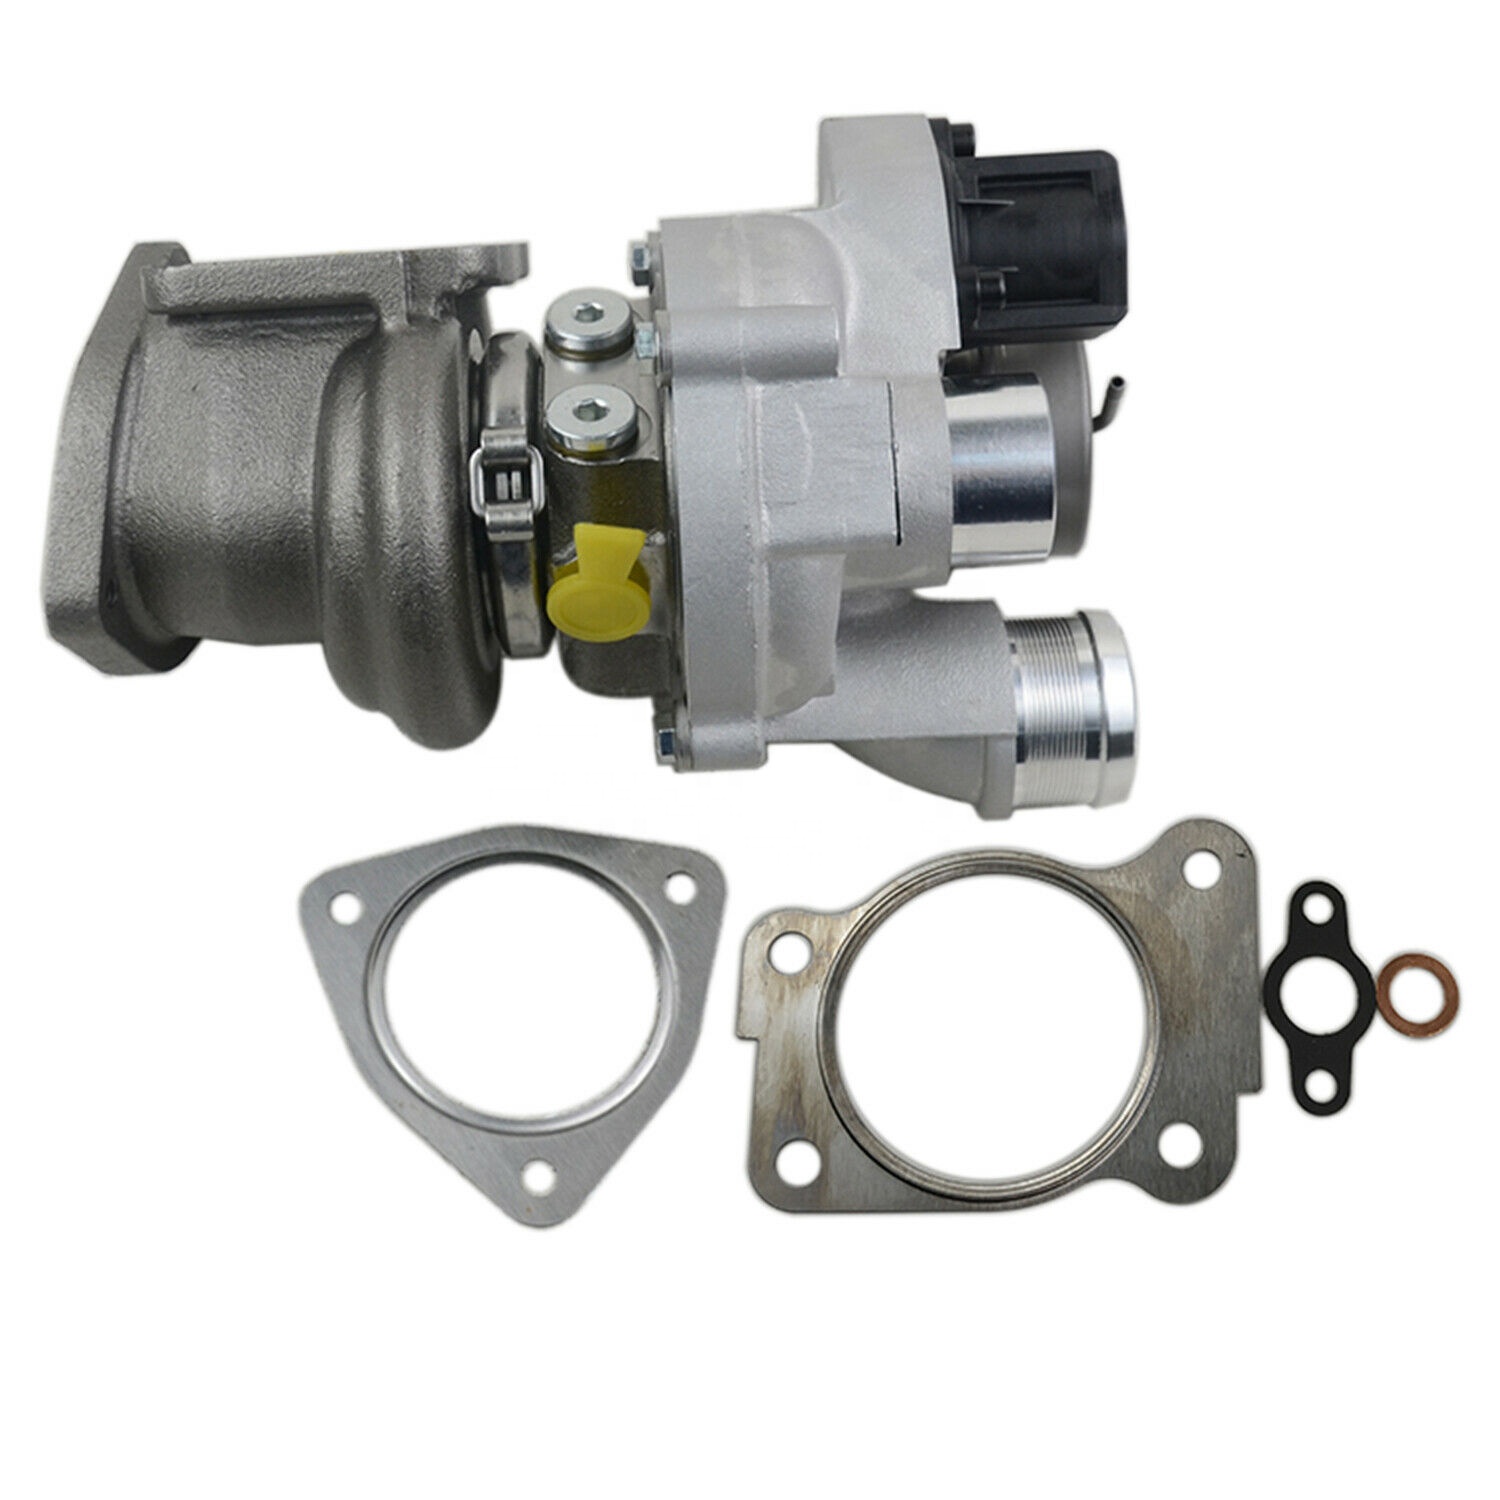  Turbocharger K03 53039880181 53039700118 53039880118 53039700163 53039880163 7600881 turbo charger for MINI COOPER EP6DTS N14 